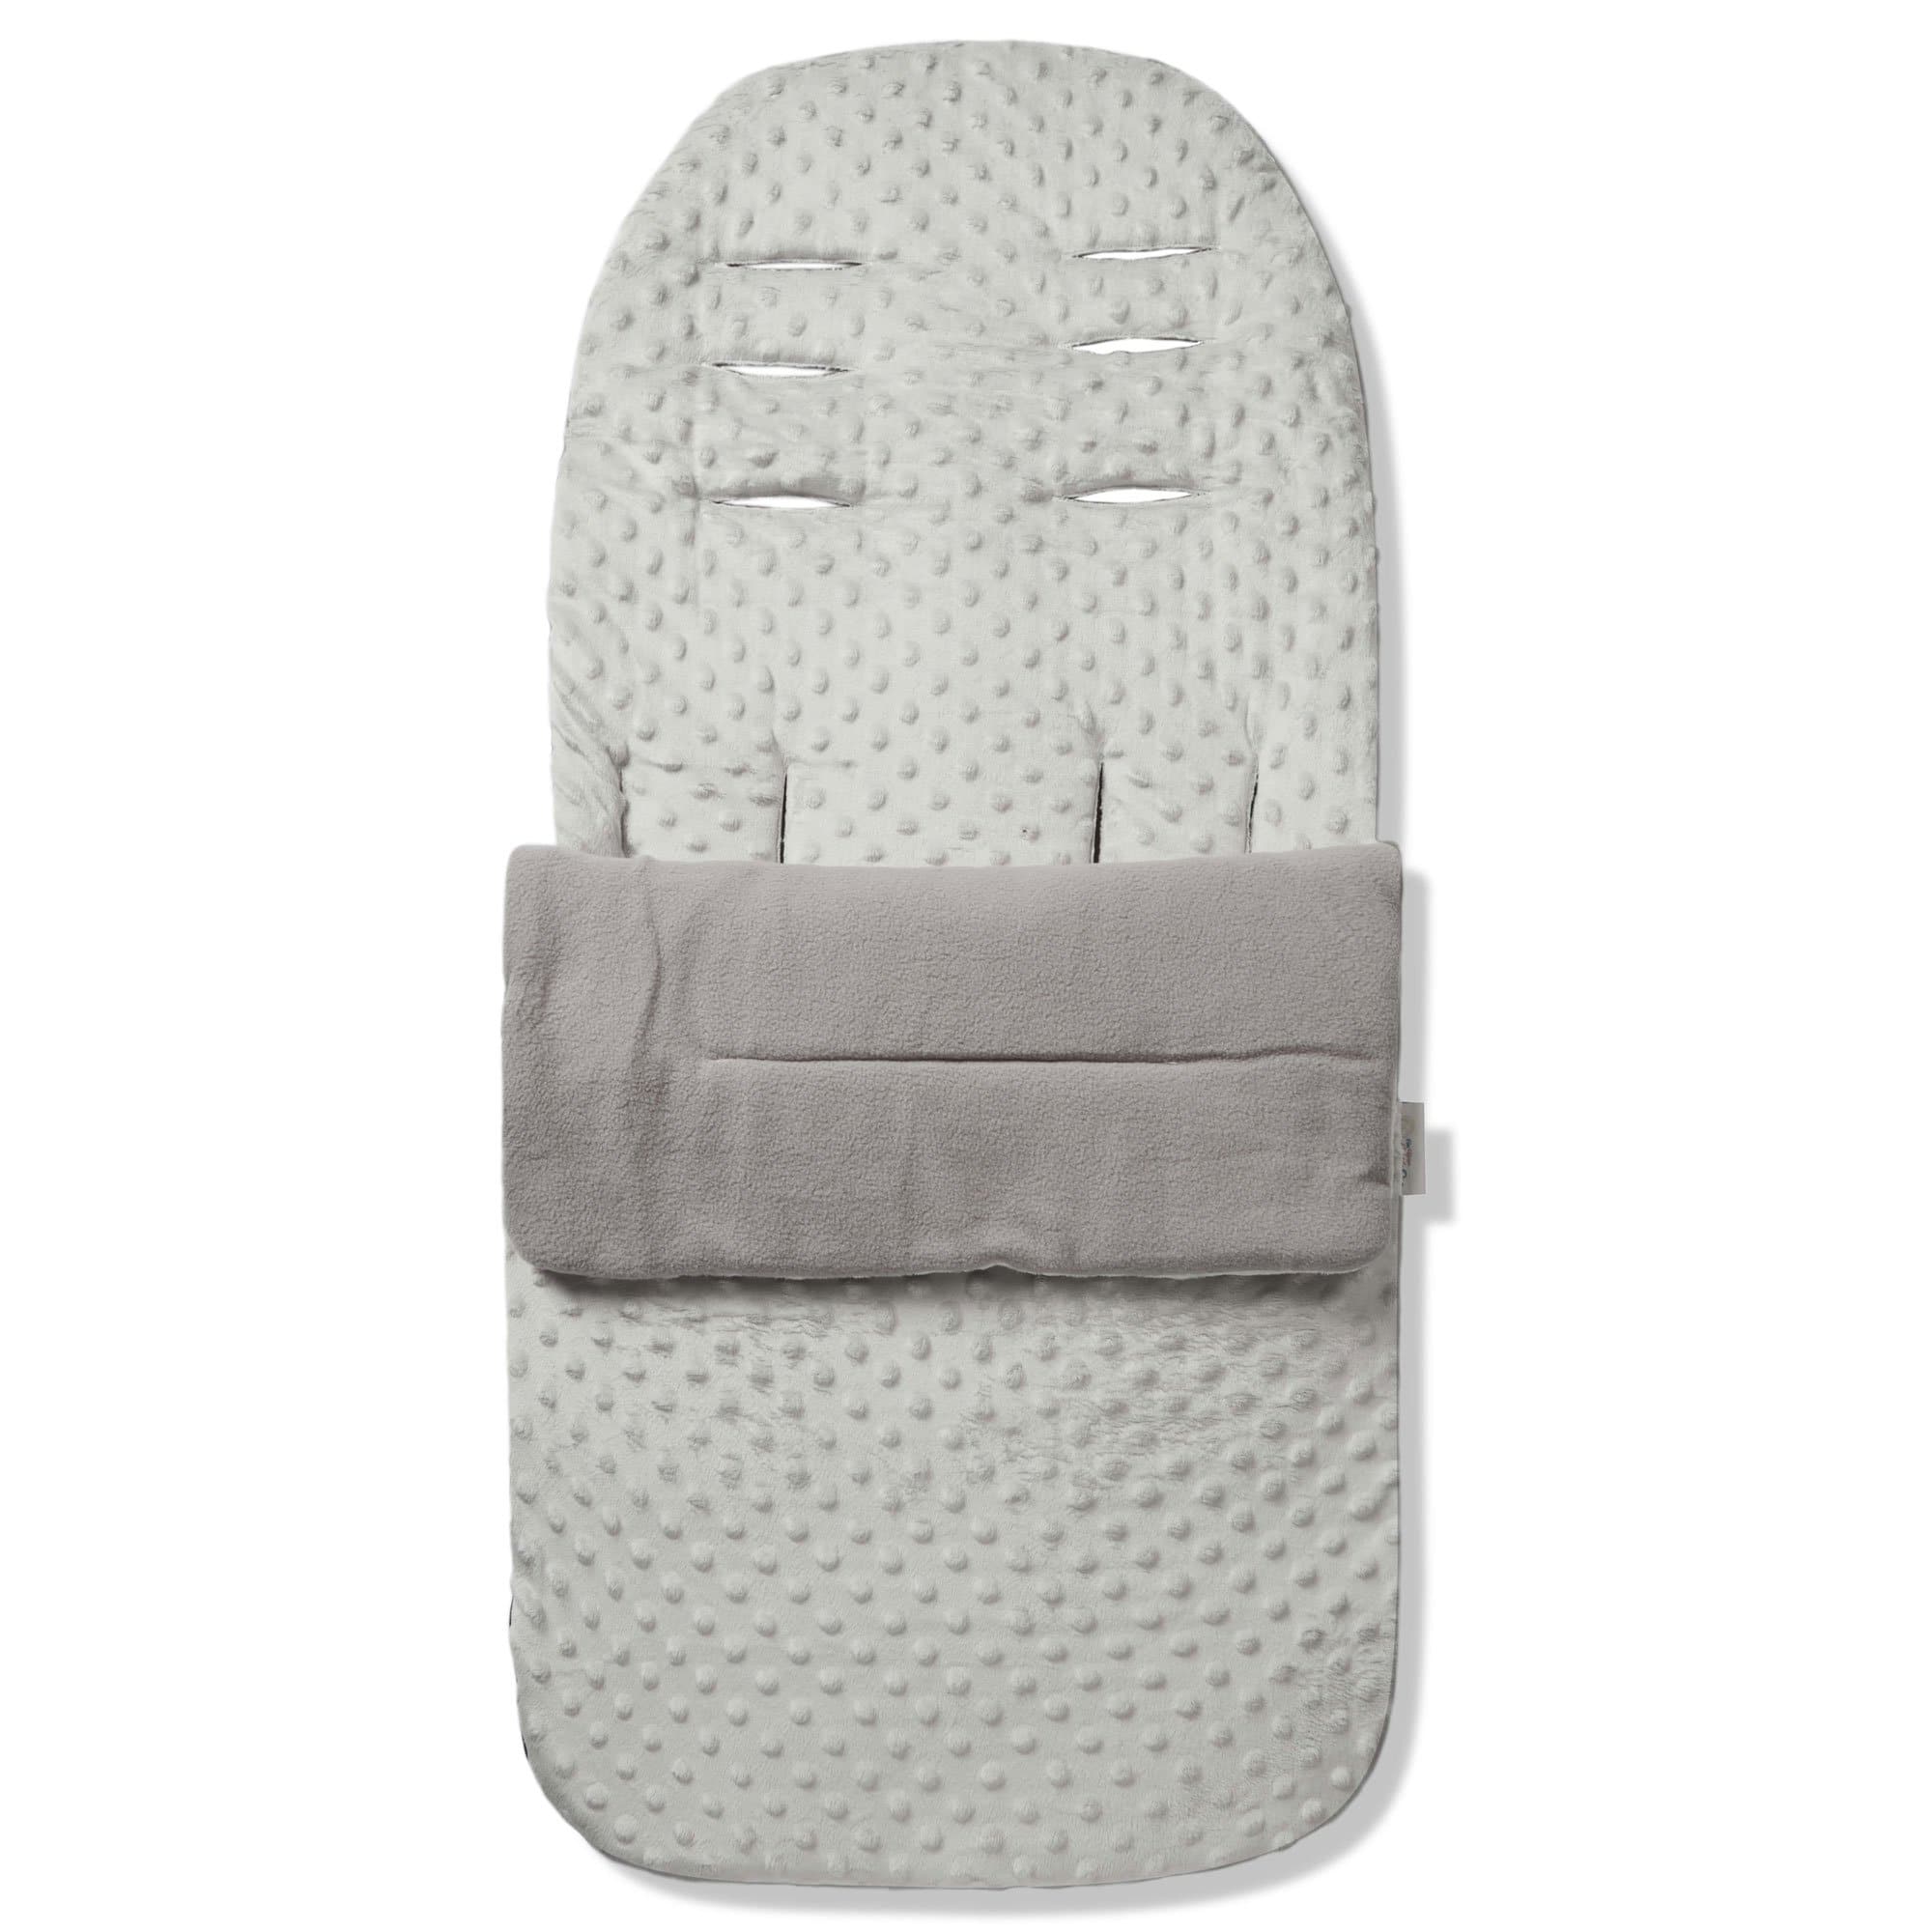 Dimple Footmuff / Cosy Toes Compatible with Nuna - Grey / Fits All Models | For Your Little One